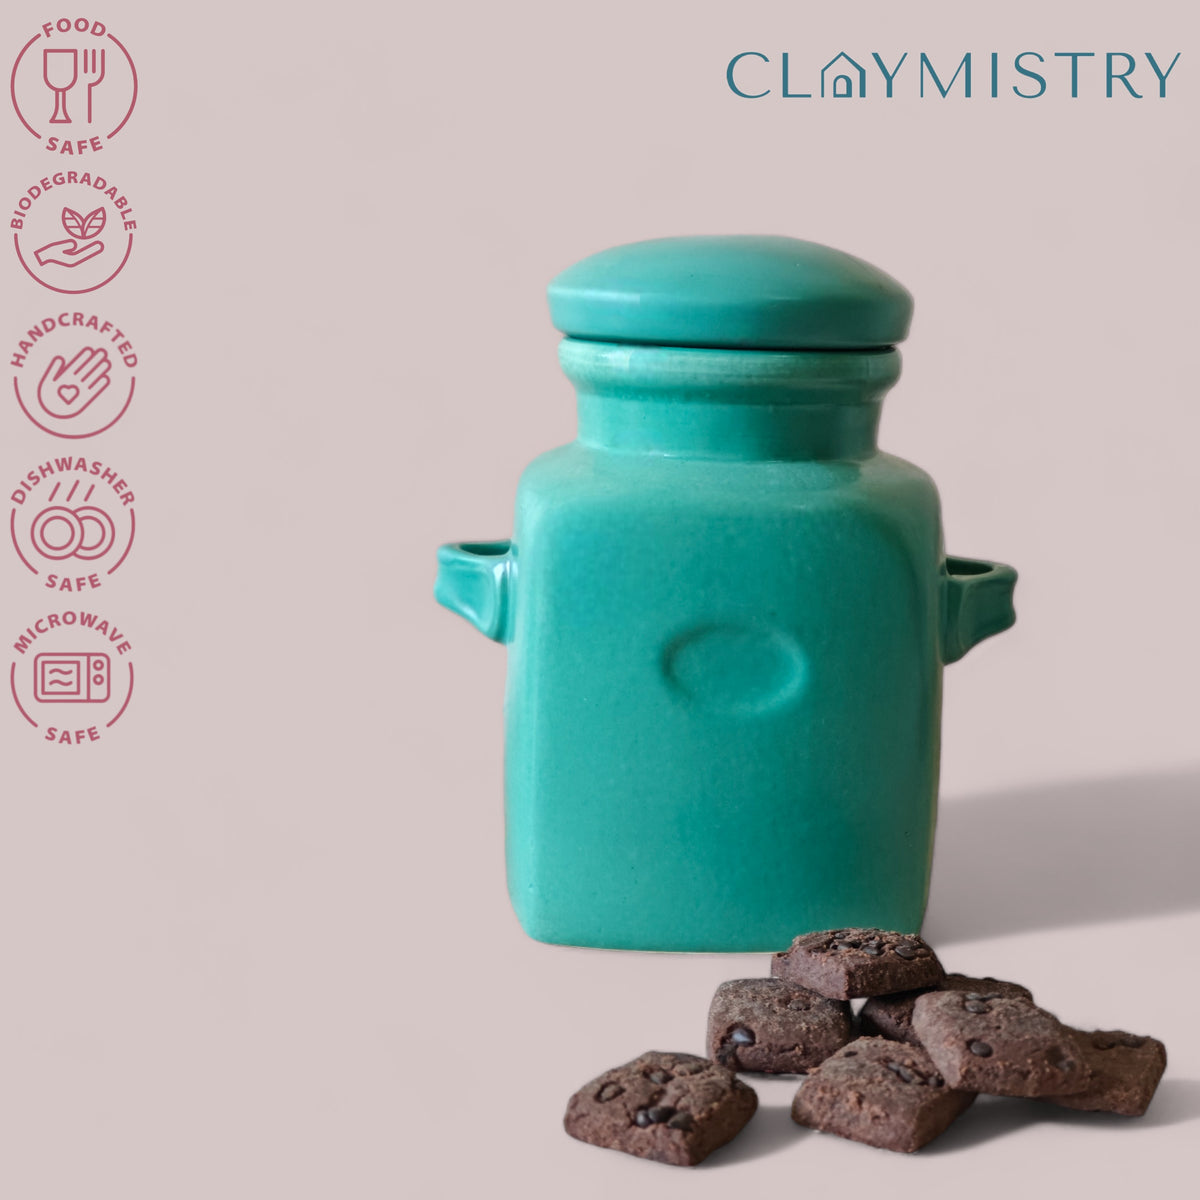 Claymistry Multi Utility Ceramic Storage Box with Lid, Set of 1 | 20cm * 14cm * 23cm | Glossy Finish | Food Storage Container | Dishwasher Safe | Teal, Kettles Jug, Jar Container